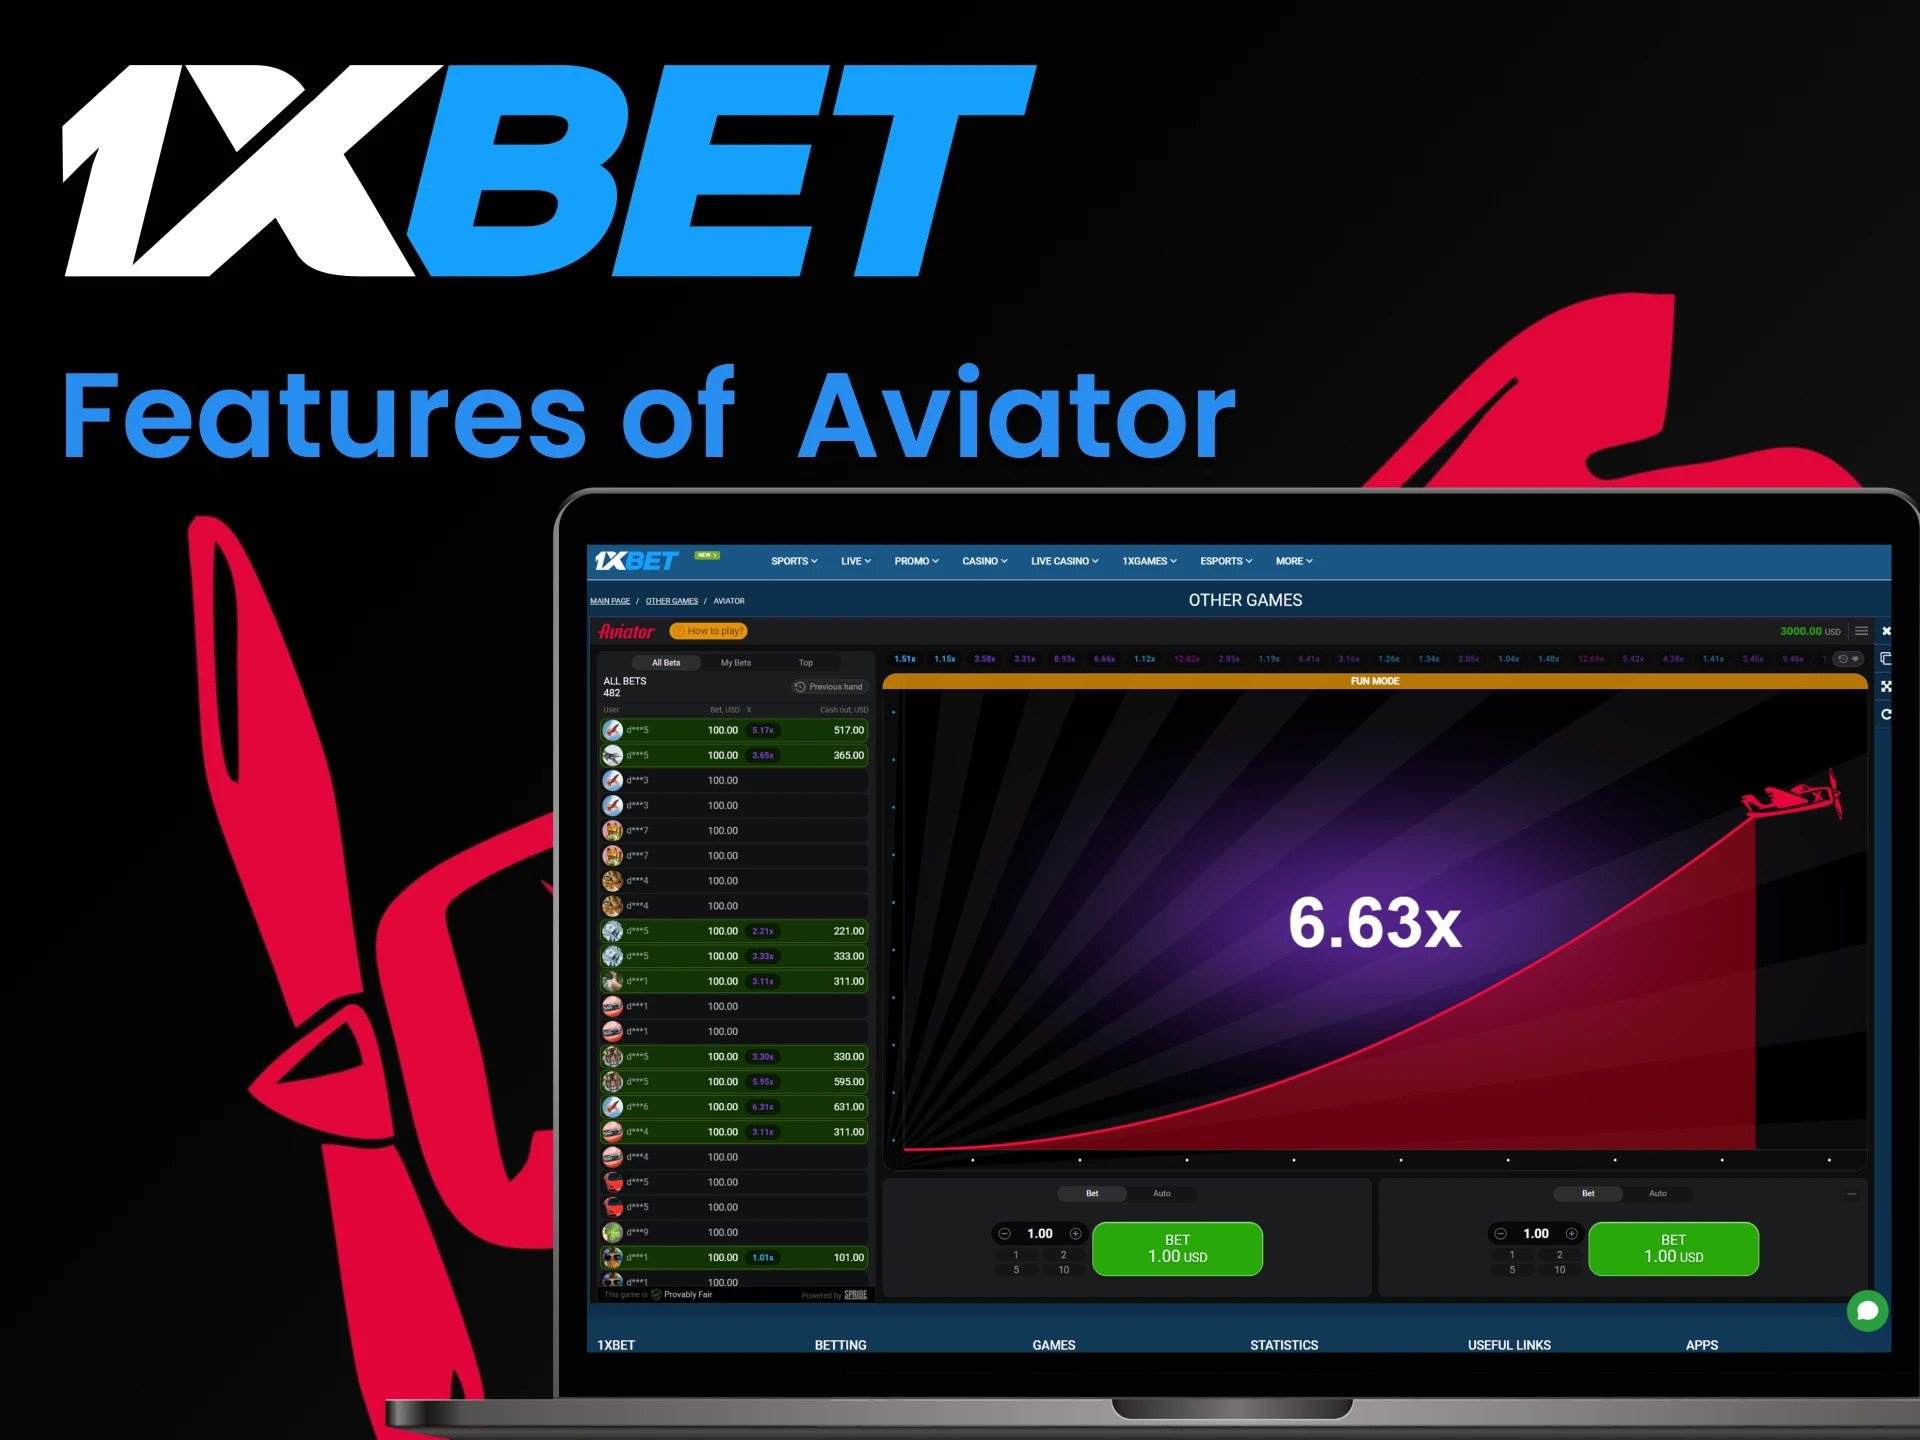 1xbet is constantly improving its service for playing Aviator.